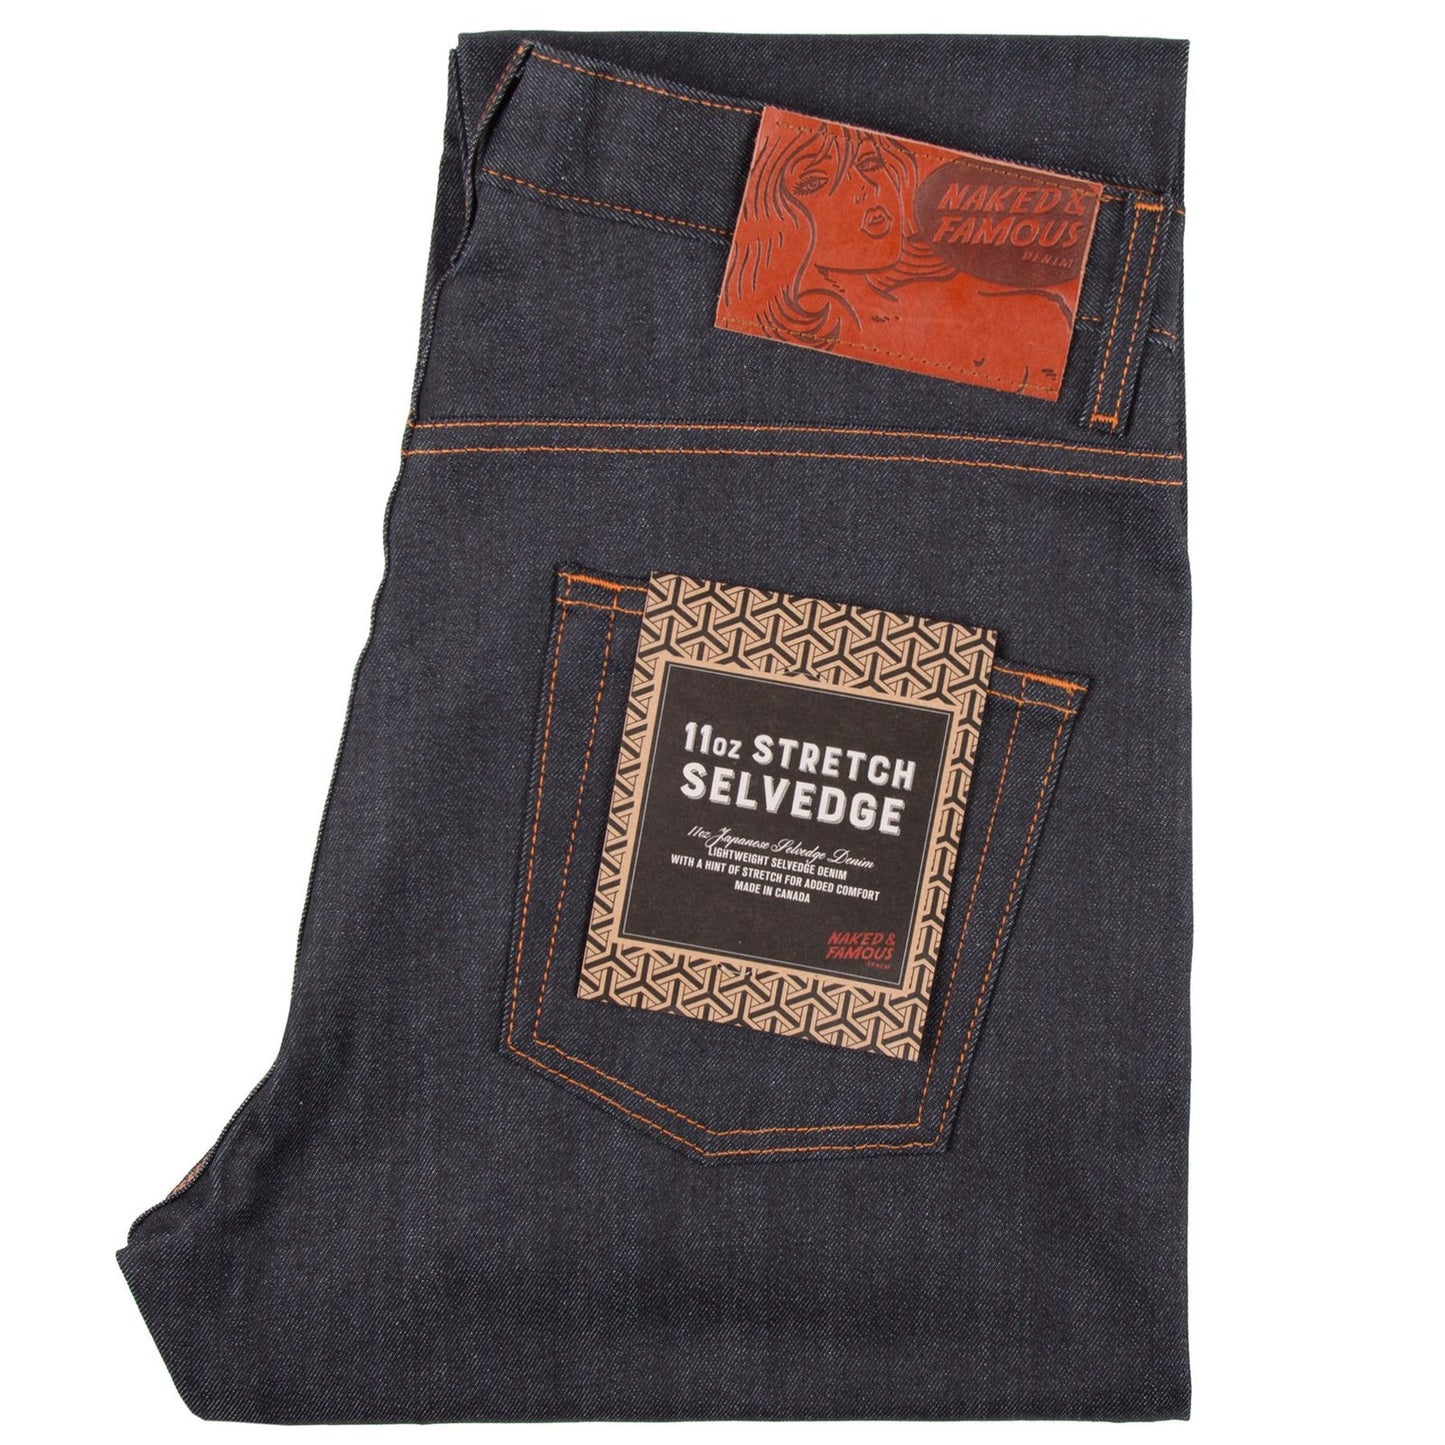 Naked and Famous EasyGuy 11oz Stretch Selvedge